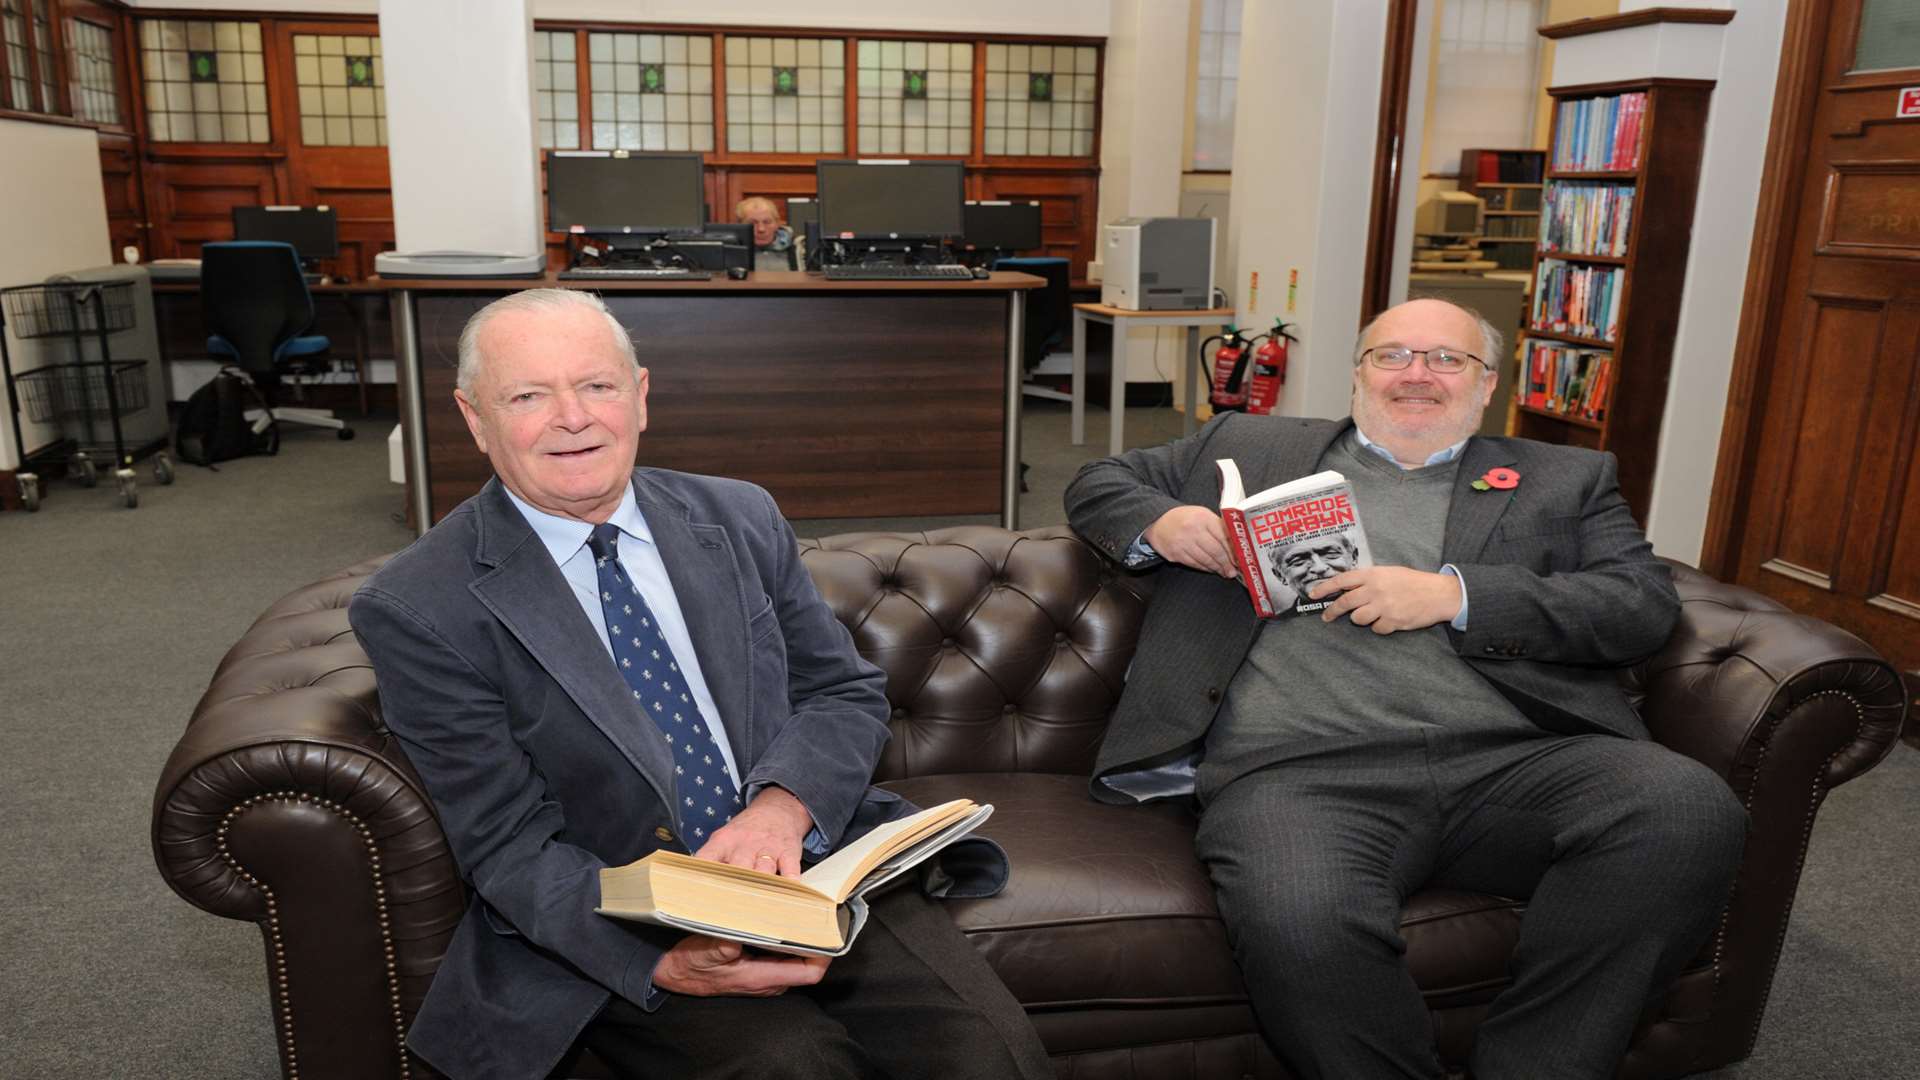 Mike Hill, KCC's cabinet member for community services, and Dartford council leader Cllr Jeremy Kite. What book is that you're reading, Cllr Kite?